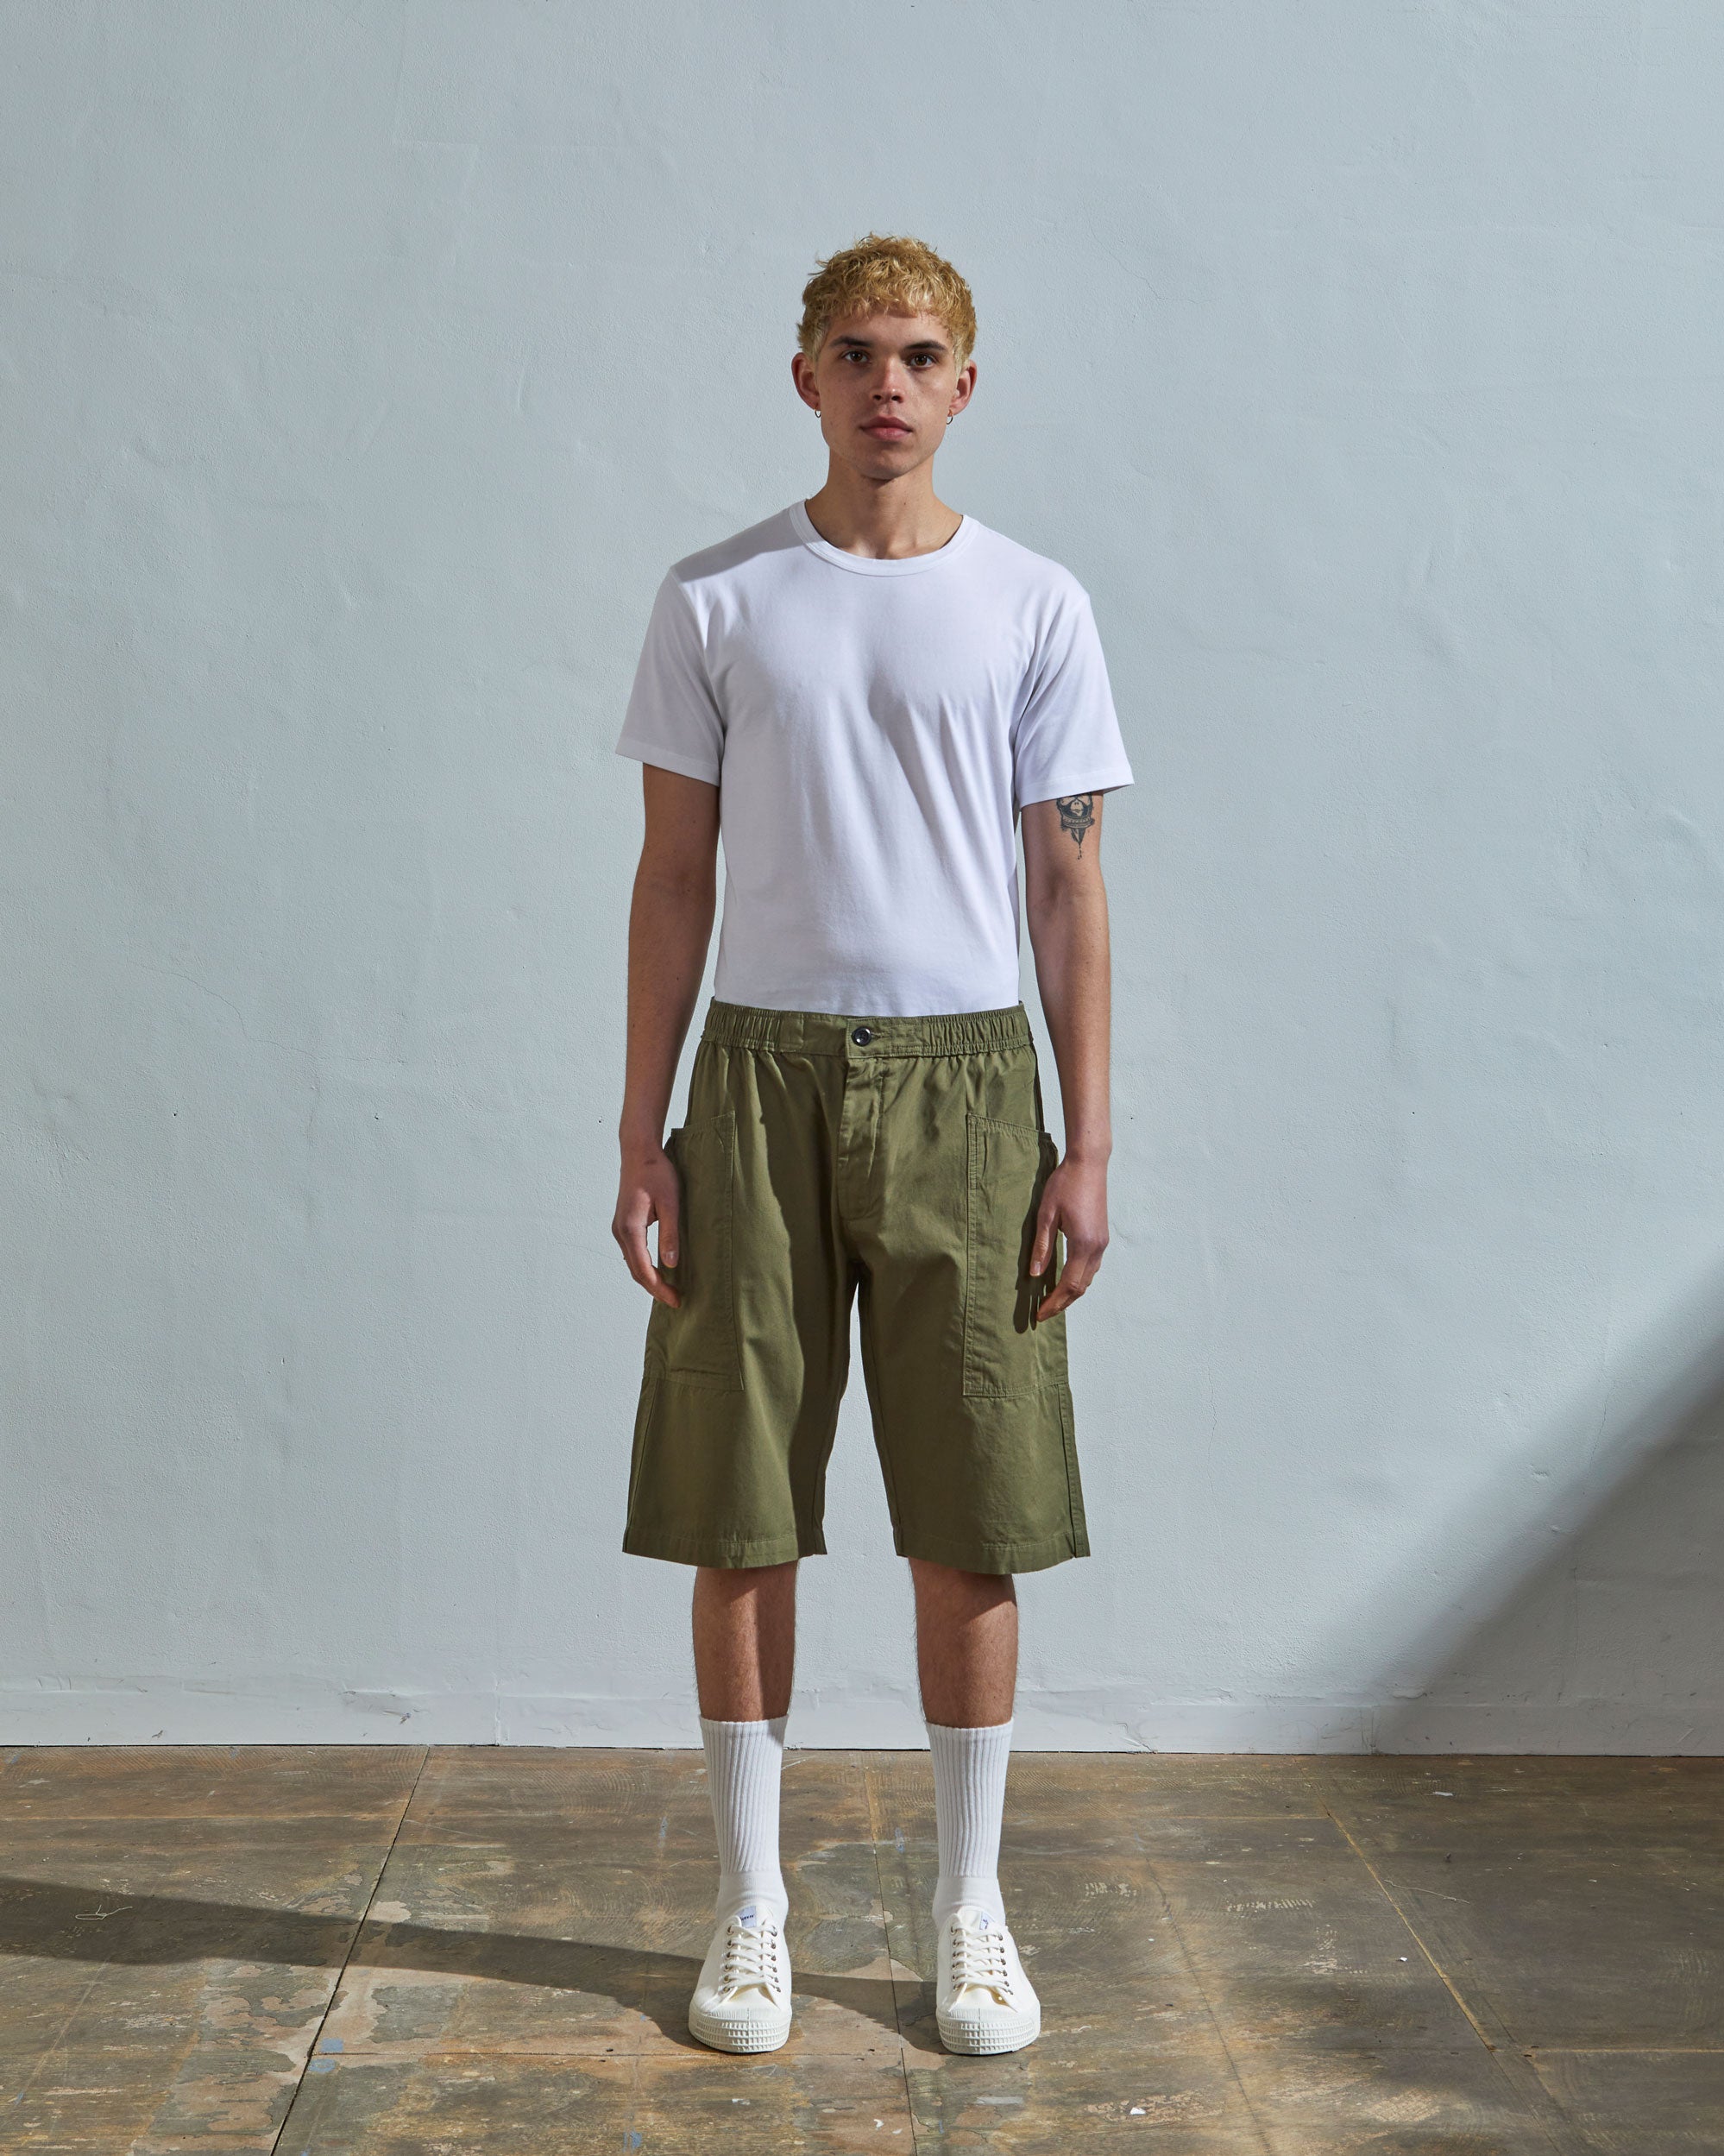 Front view of model wearing olive organic cotton #5015 lightweight shorts by Uskees. Paired with simple white t-shirt.